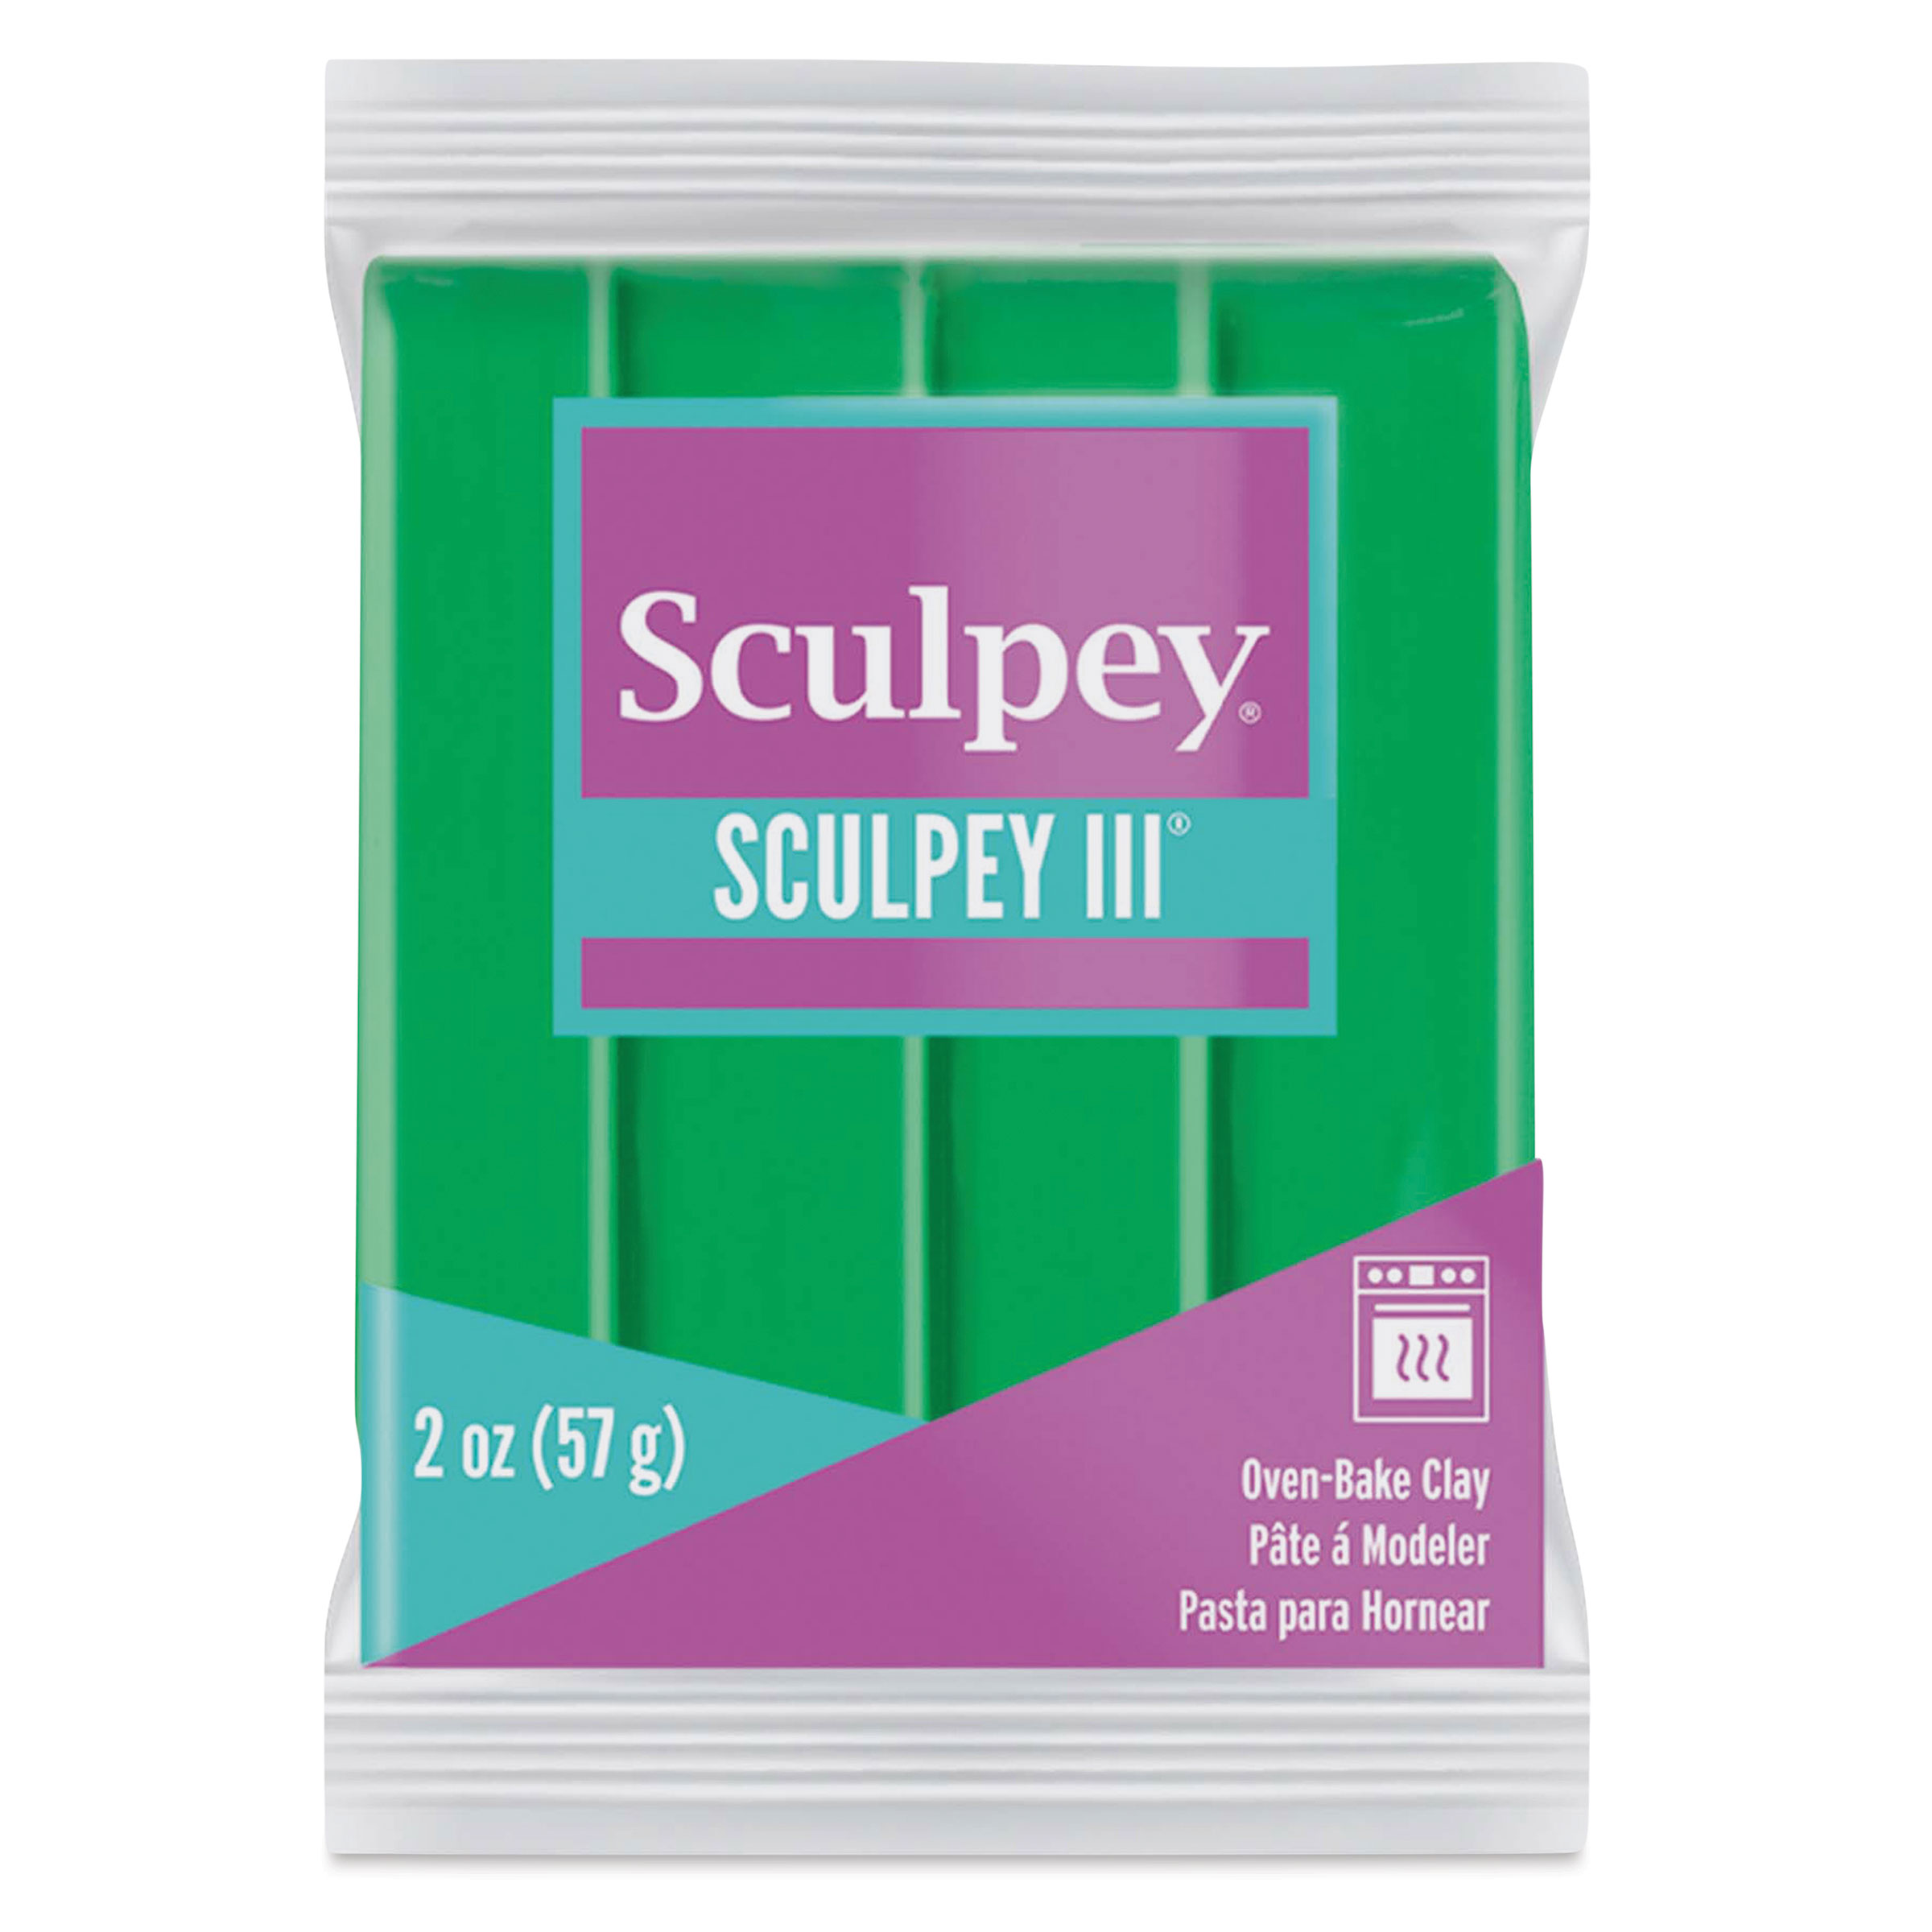 Sculpey Polymer Clay, White, 1.75lbs, Multipack of 3 